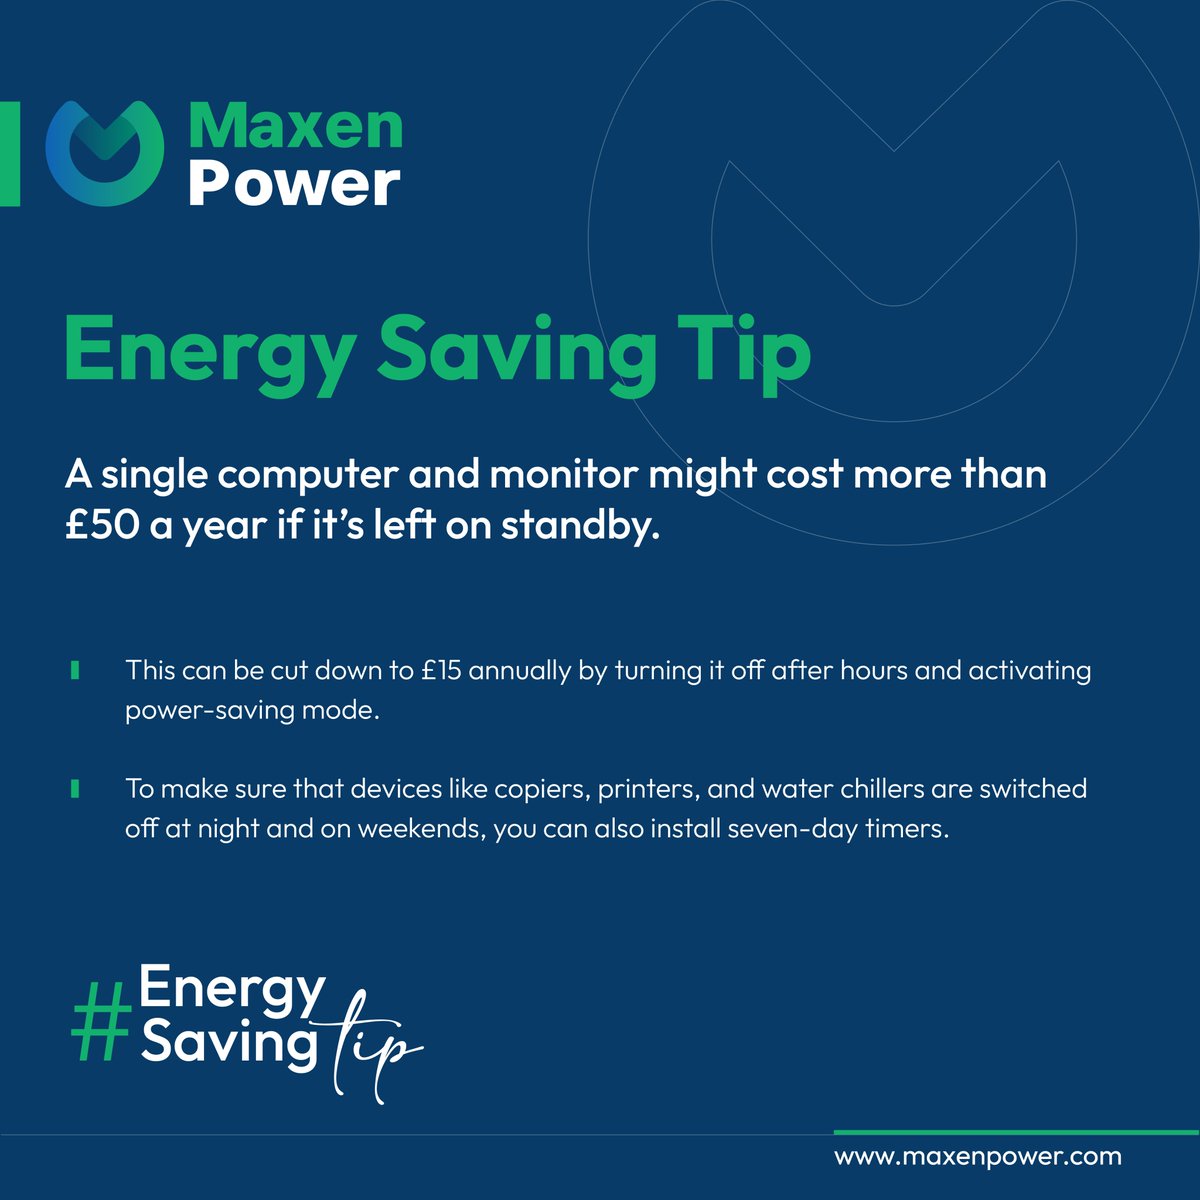 Reduce your carbon footprint and save money with this simple tip: switch off your office equipment when it's not in use.

#MaxenPower #EnergisingBusinesses #EnergySavingTips